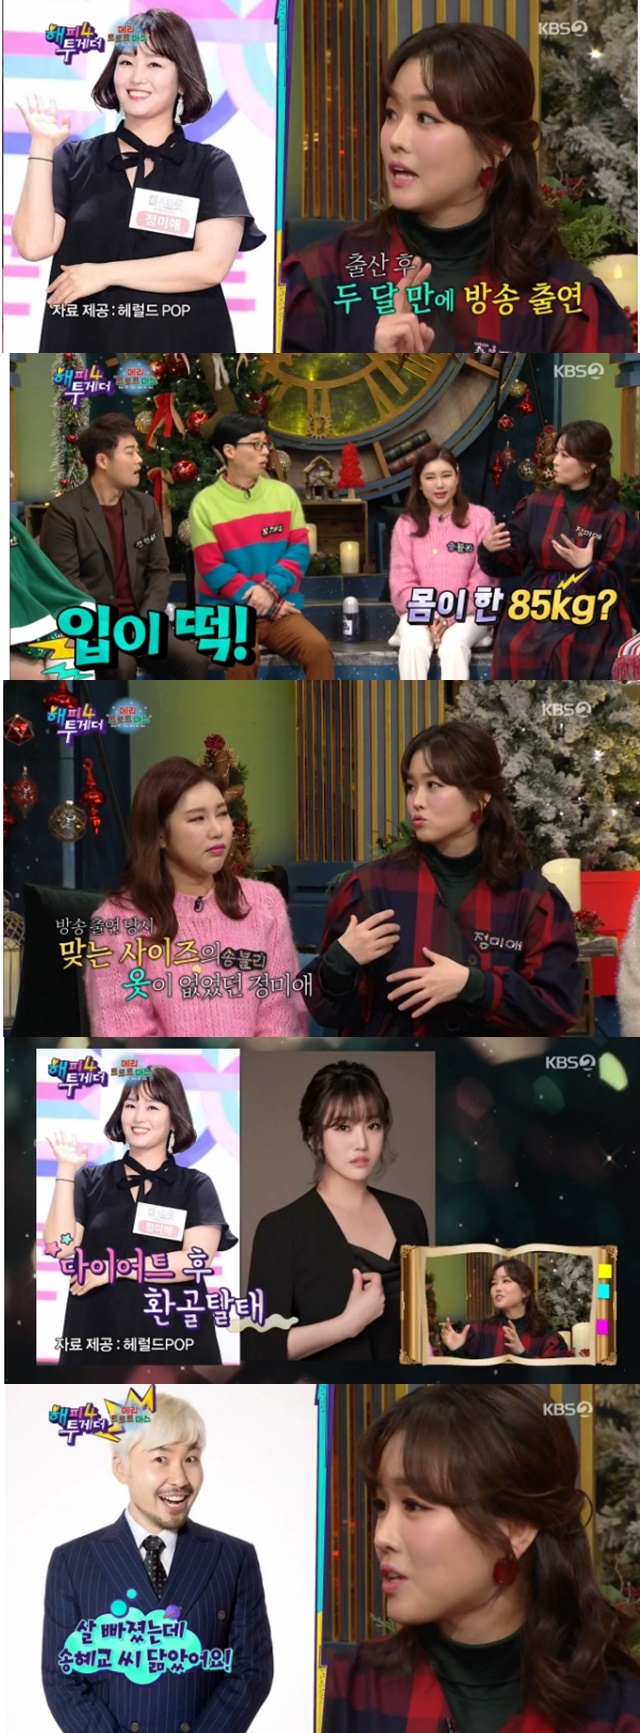 The Miami appeared to be slimmer than it was.KBS 2TV Happy Together 4 (hereinafter referred to as Hattoo 4), which was broadcast on December 26, featured Trot actress Song Gain, The Miami, Hongja, Jung Da Kyung and Guk Haeng.I appeared in two months after giving birth, but it was 85kg at the time of Mistrot, said The Miami.I did not have any clothes at that time, so I wore fastballs from abroad to 2XL, he said. I lost weight to a size 66 now.Choi Seung Hye